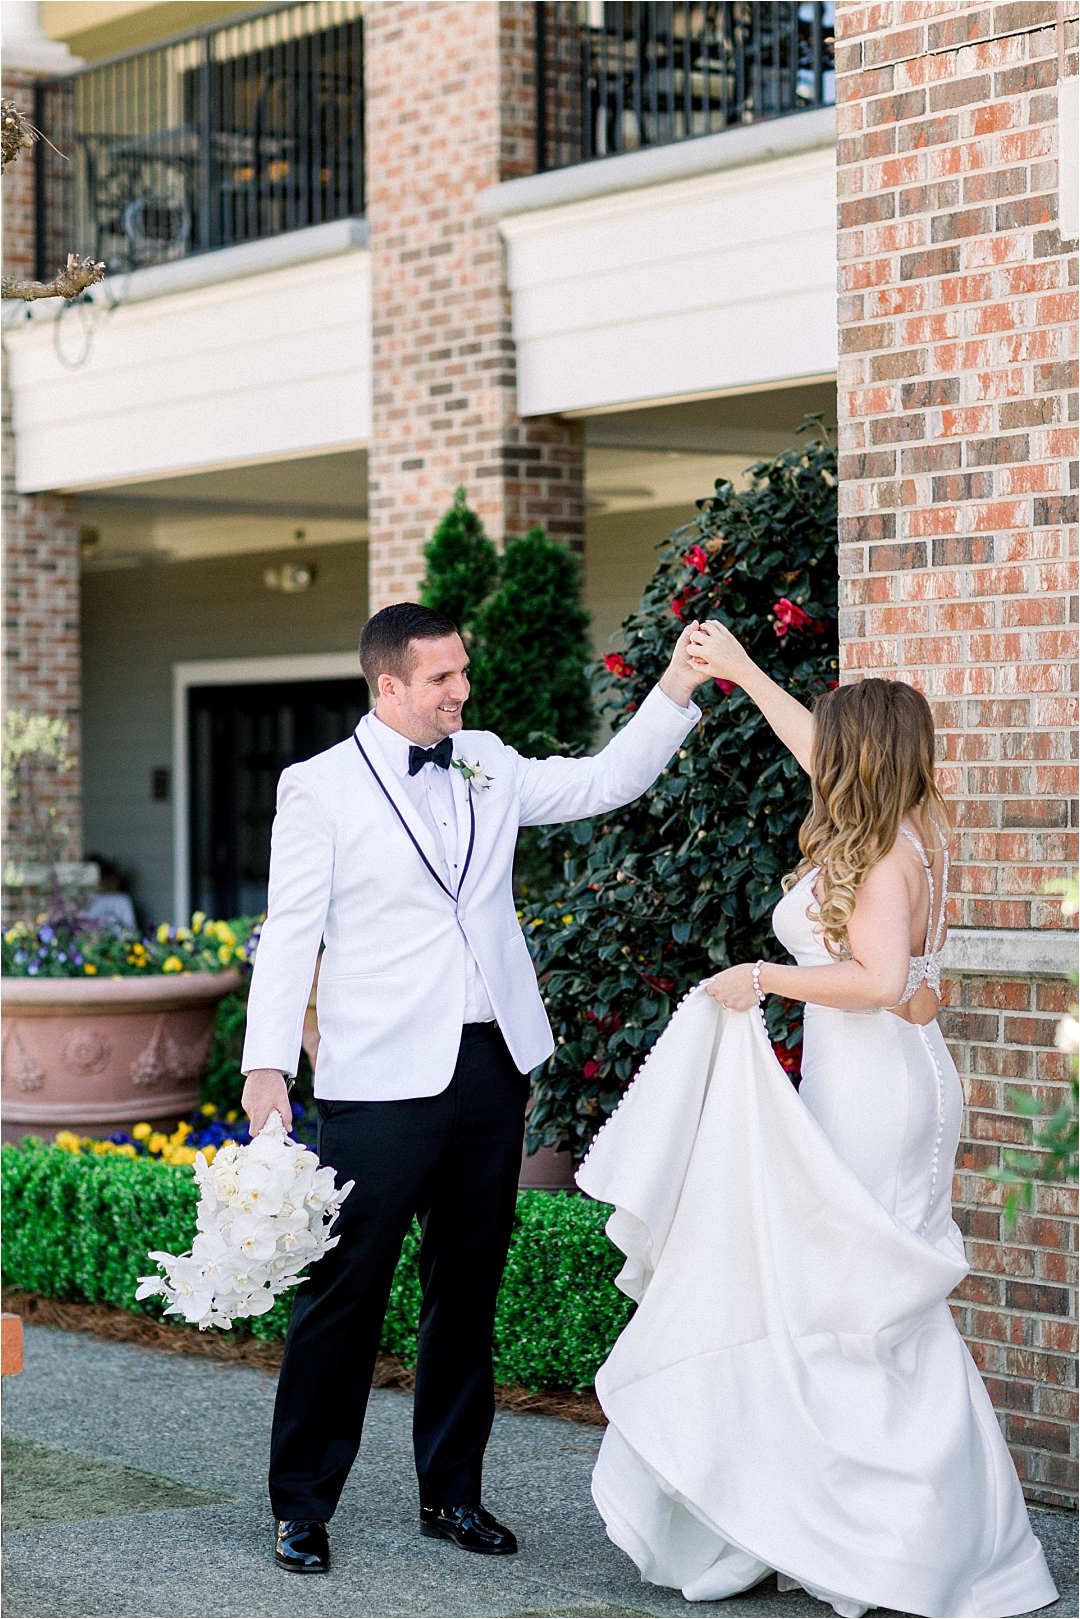 bride twirling in dress_Photos by Leigh Wolfe, Atlanta's Top Wedding Photographer